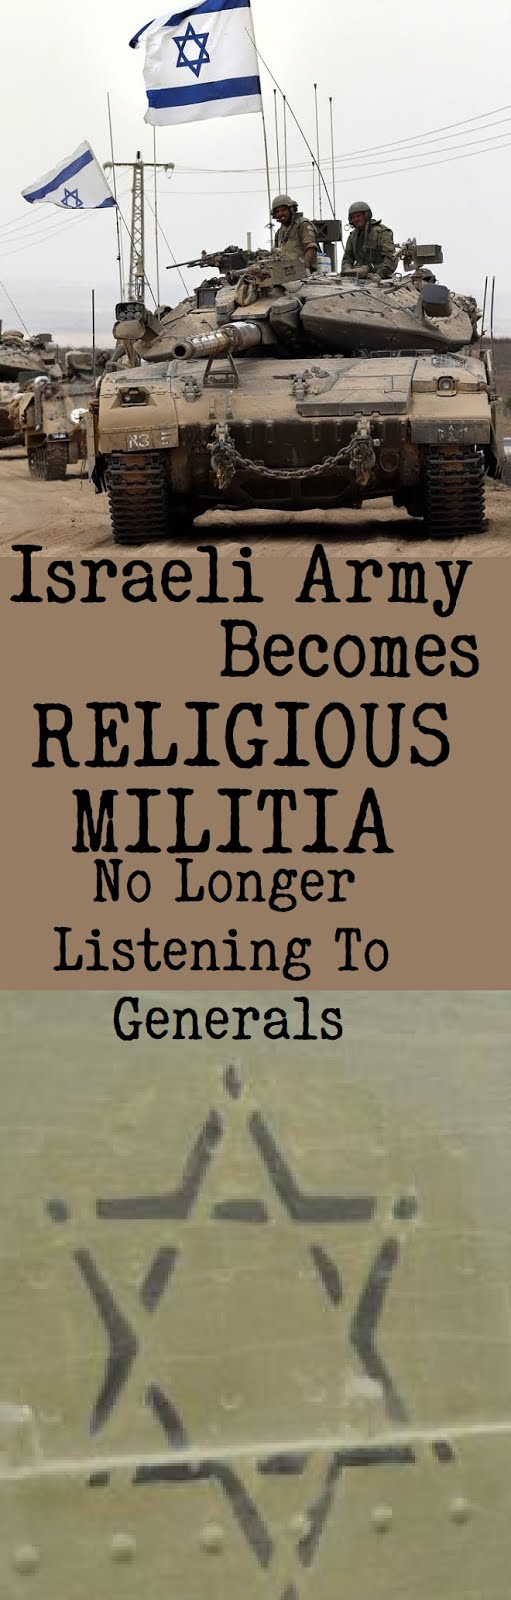 Israeli Religious Militias? Is there NUCLEAR Sub Wars Happening?